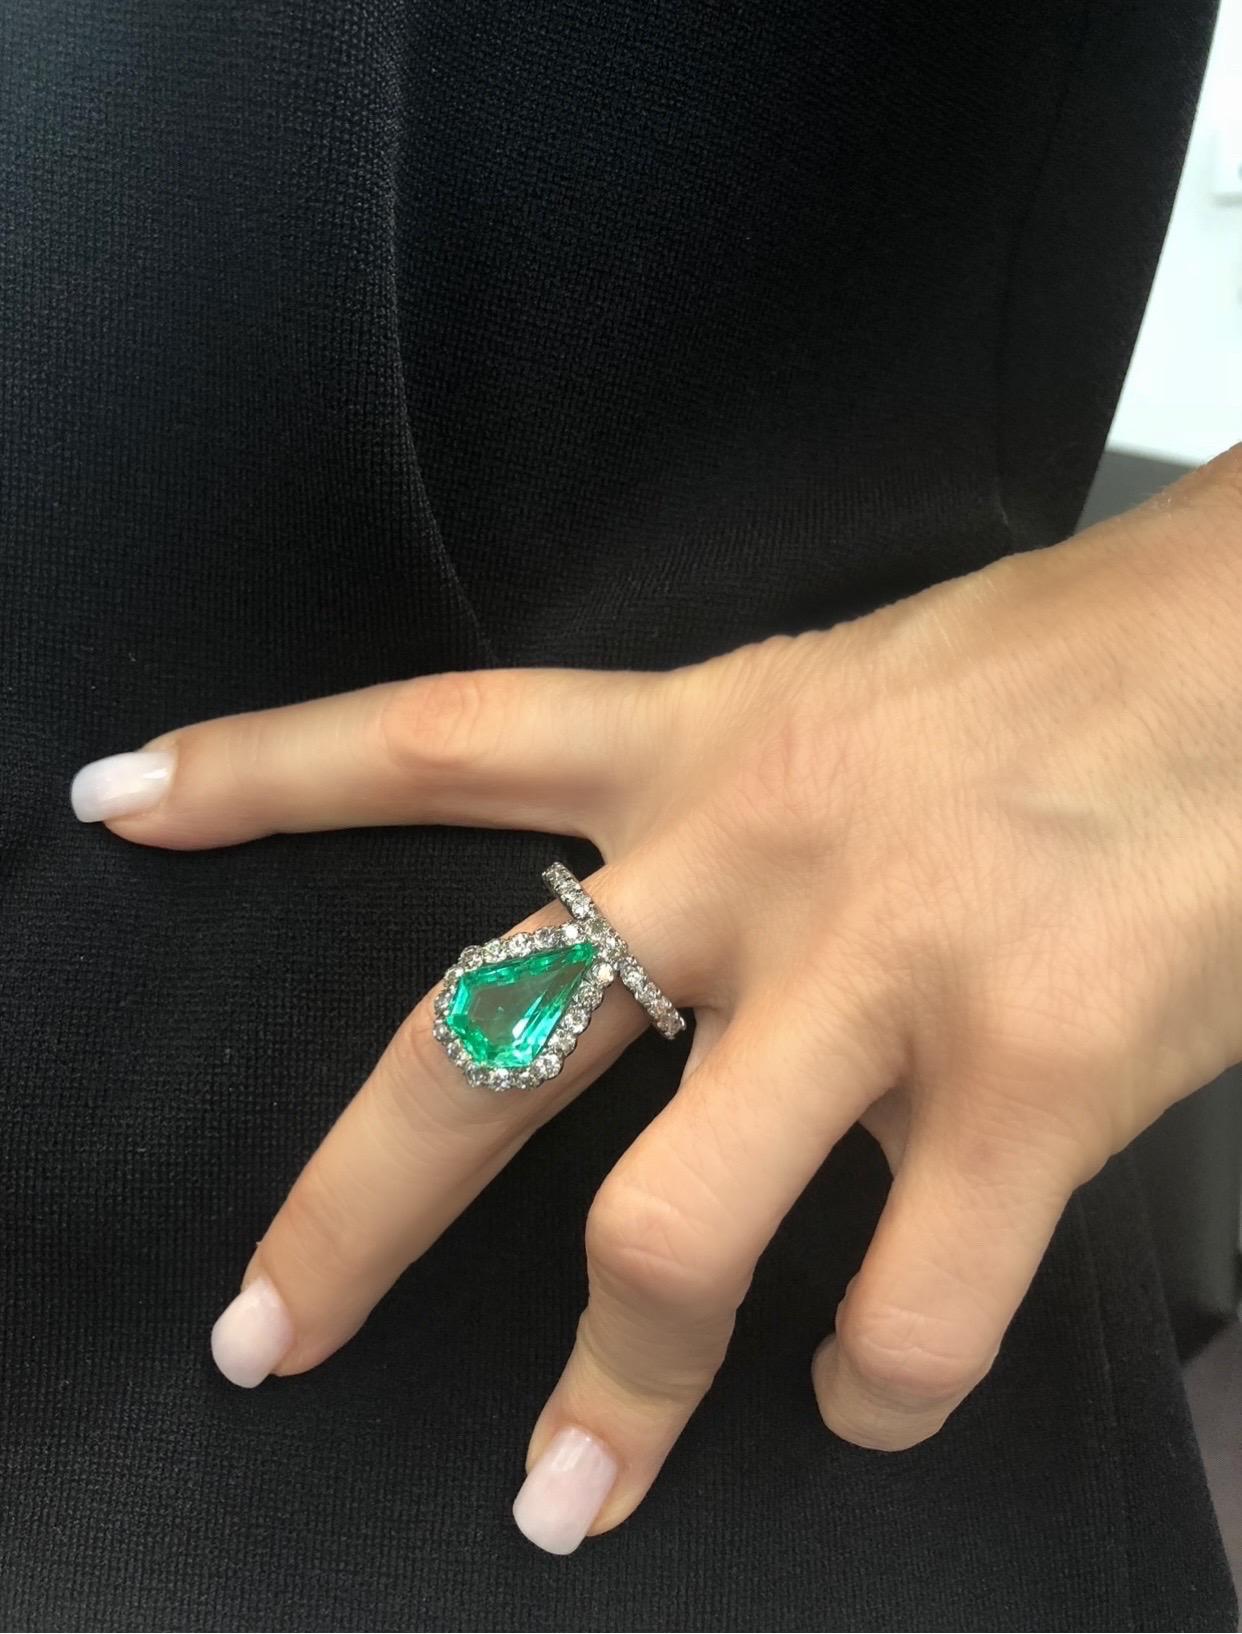 This One-Of-A-Kind Colombian Emerald Shield ring is truly magnificent. ( please see all photos)
The Gia Certified shield emerald is 6.06 CTW. Set in 18k gold with a rhodium finish. (GIA report attached ) Diamonds around emerald are set in silver